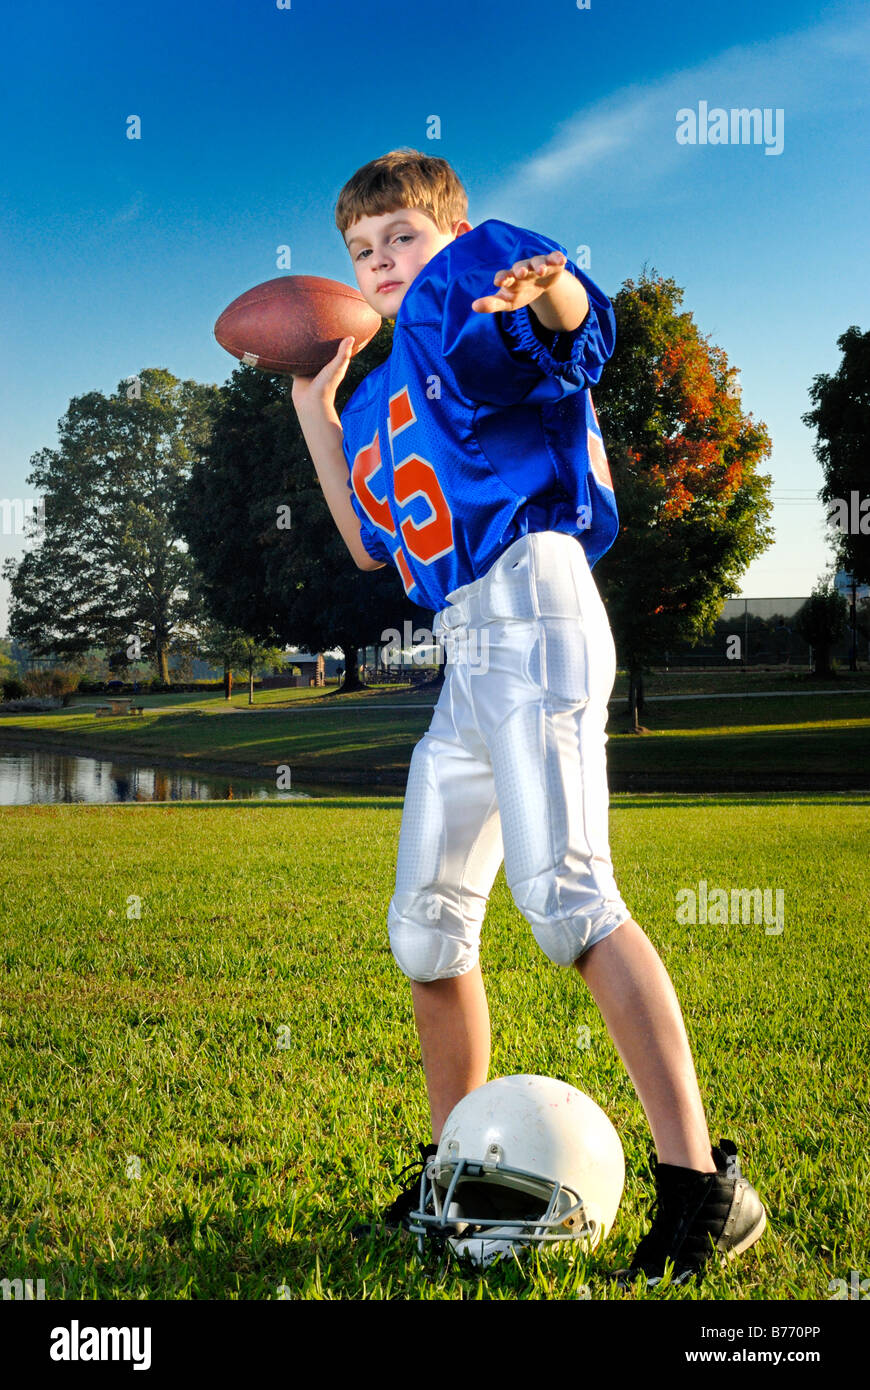 Young football player age 11 Stock Photo